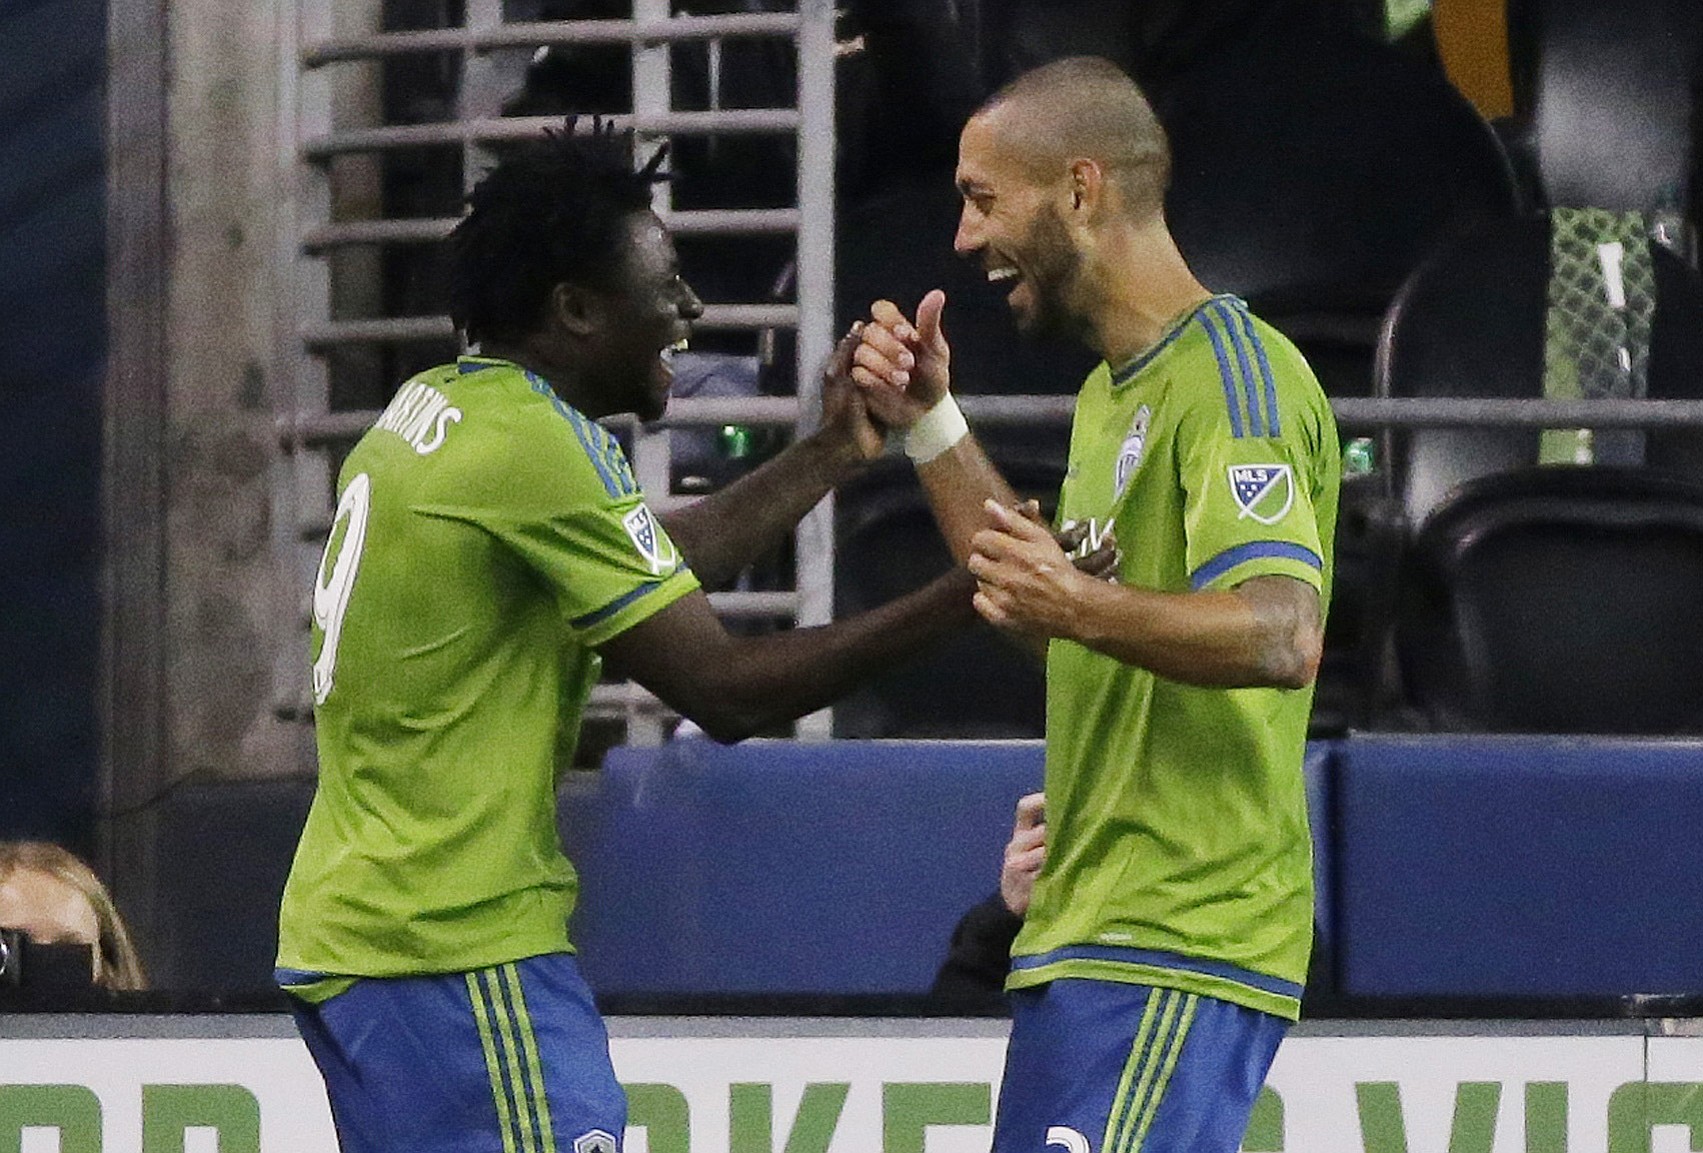 Seattle Sounders' Obafemi Martins, left is greeted by Clint Dempsey, right, after Martins scored a goal against the New England Revolution in the first half Sunday, March 8, 2015, in Seattle. Dempsey also scored in the first half of the match. (AP Photo/Ted S.